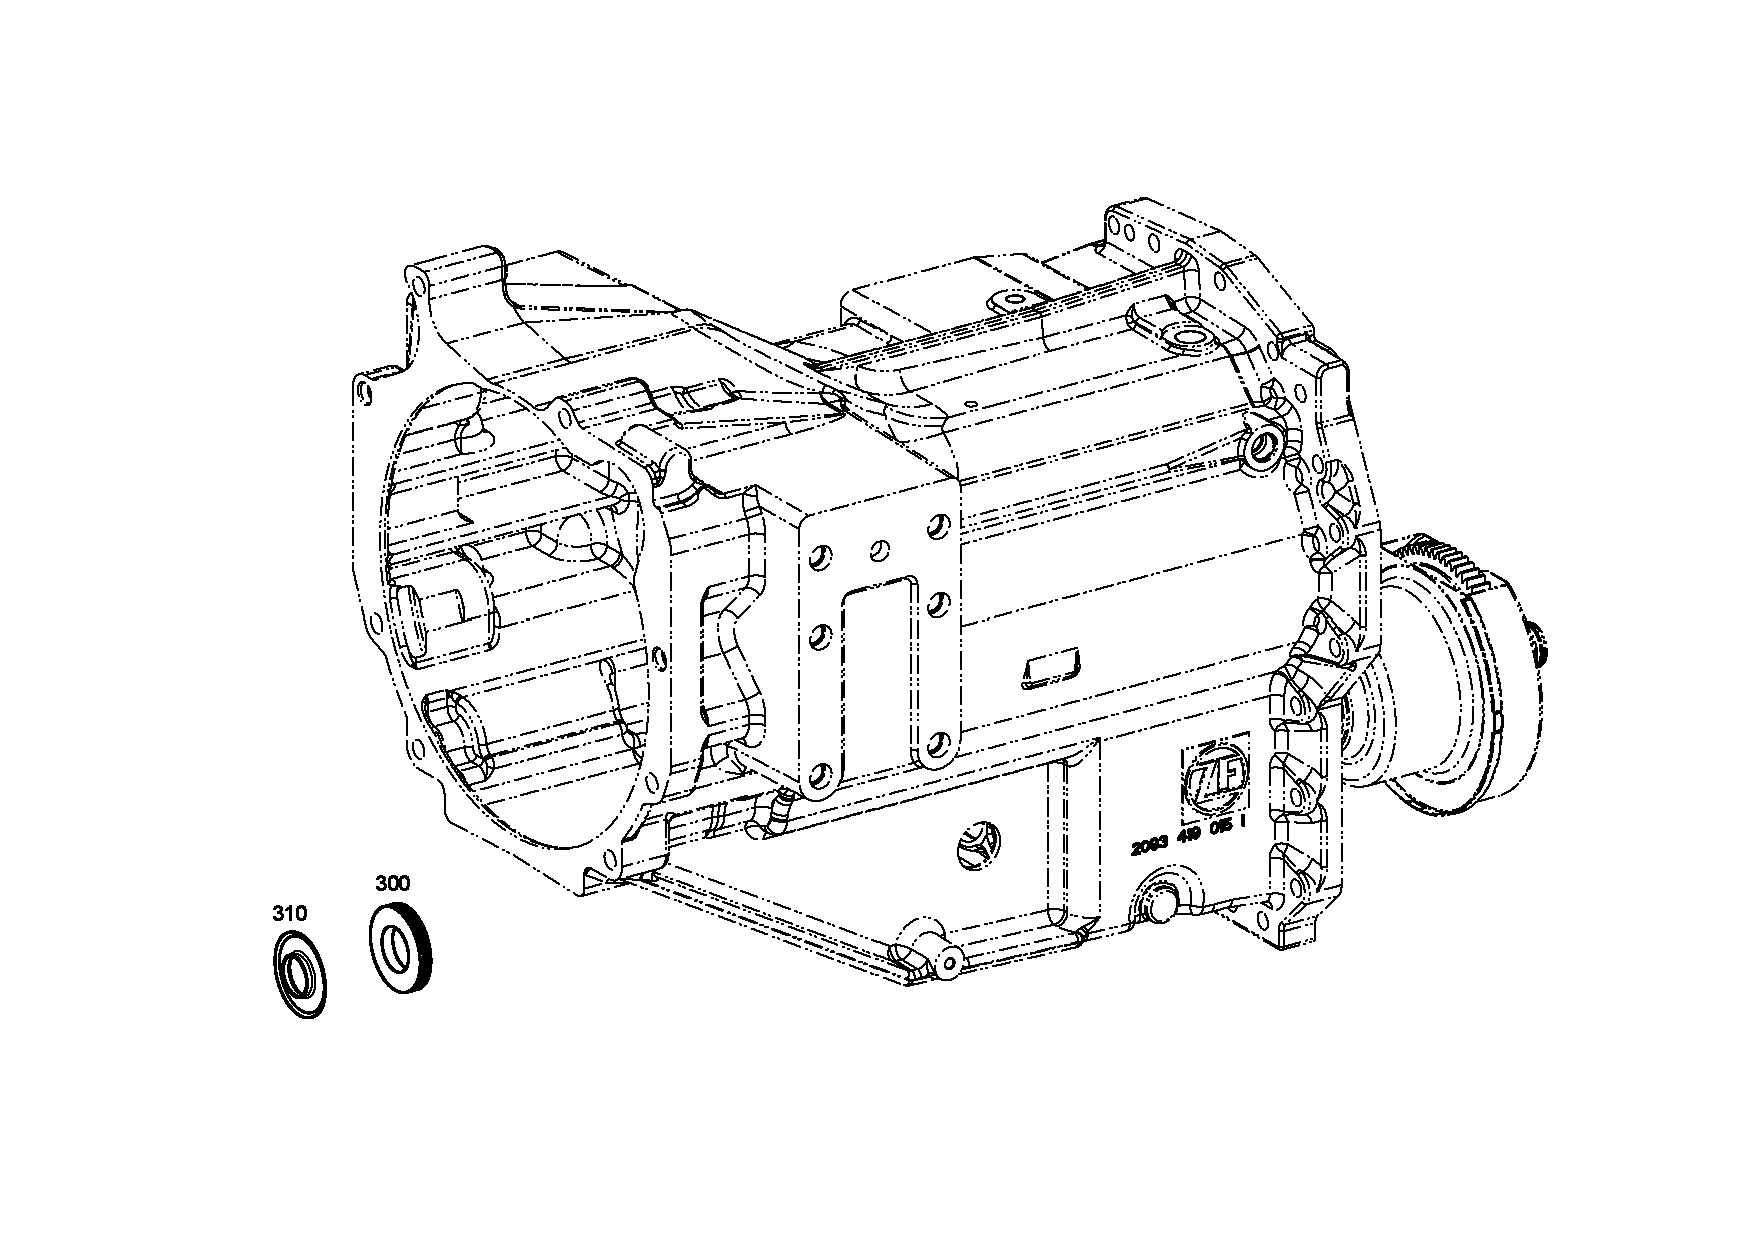 drawing for CNH NEW HOLLAND 81753C1 - DISC CARRIER (figure 2)